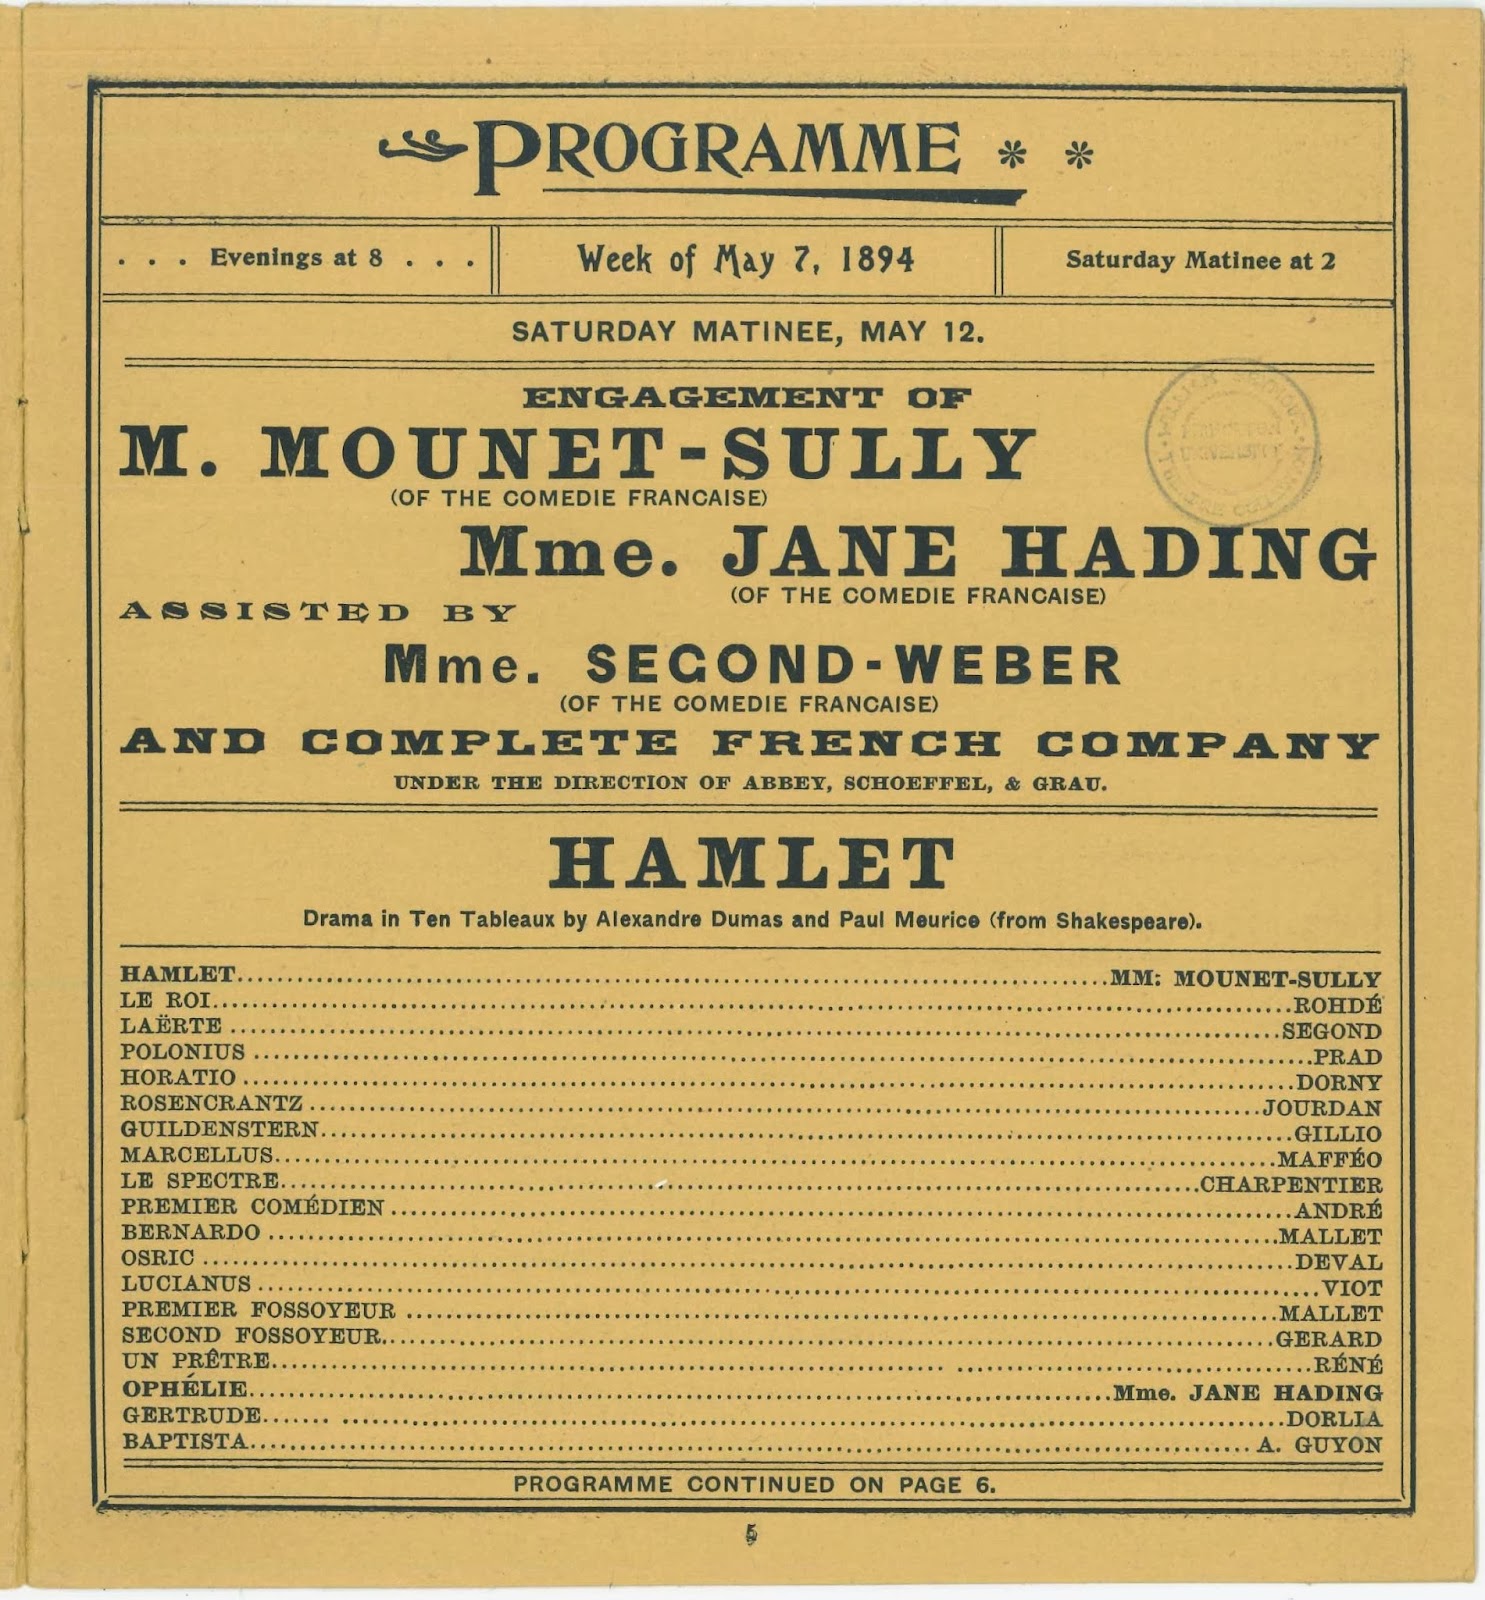 A playbill for a French production of Hamlet.